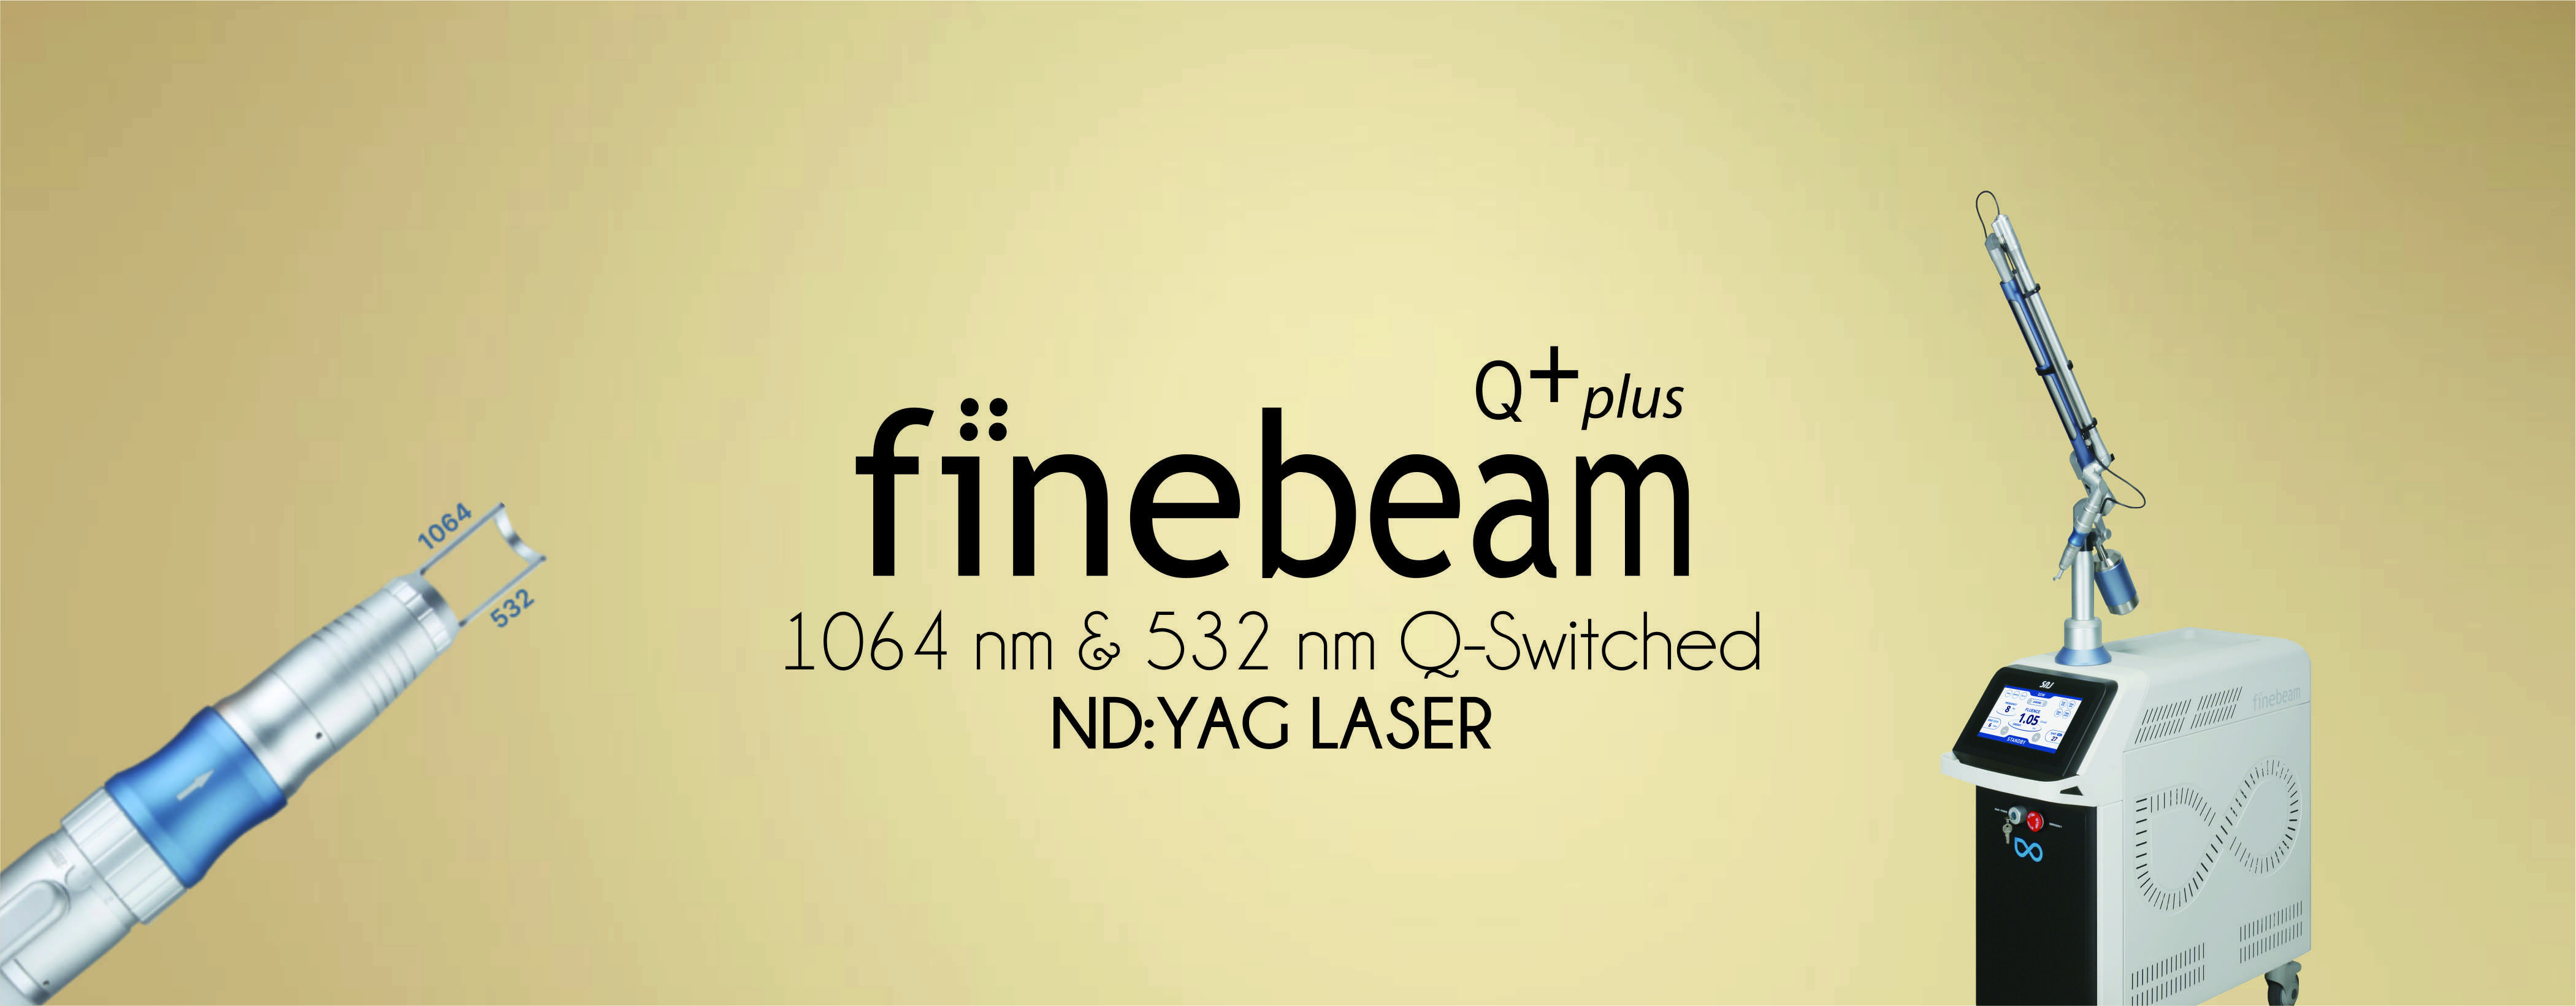 FINEBEAM 1064 nm & 532 nm Q-Switched